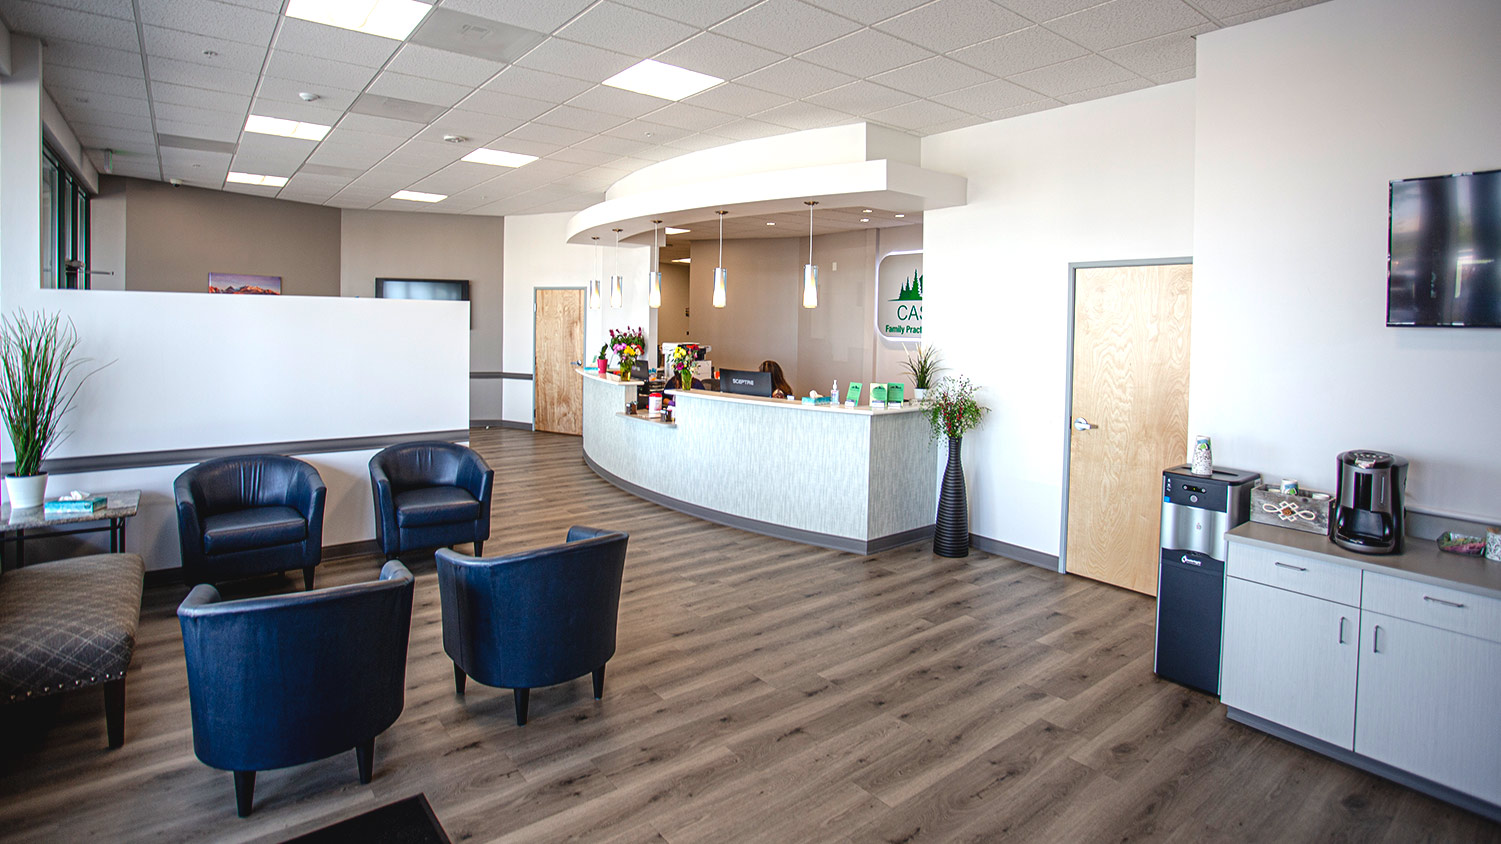 Castle Pines Family Practice and Urgent Care Lobby